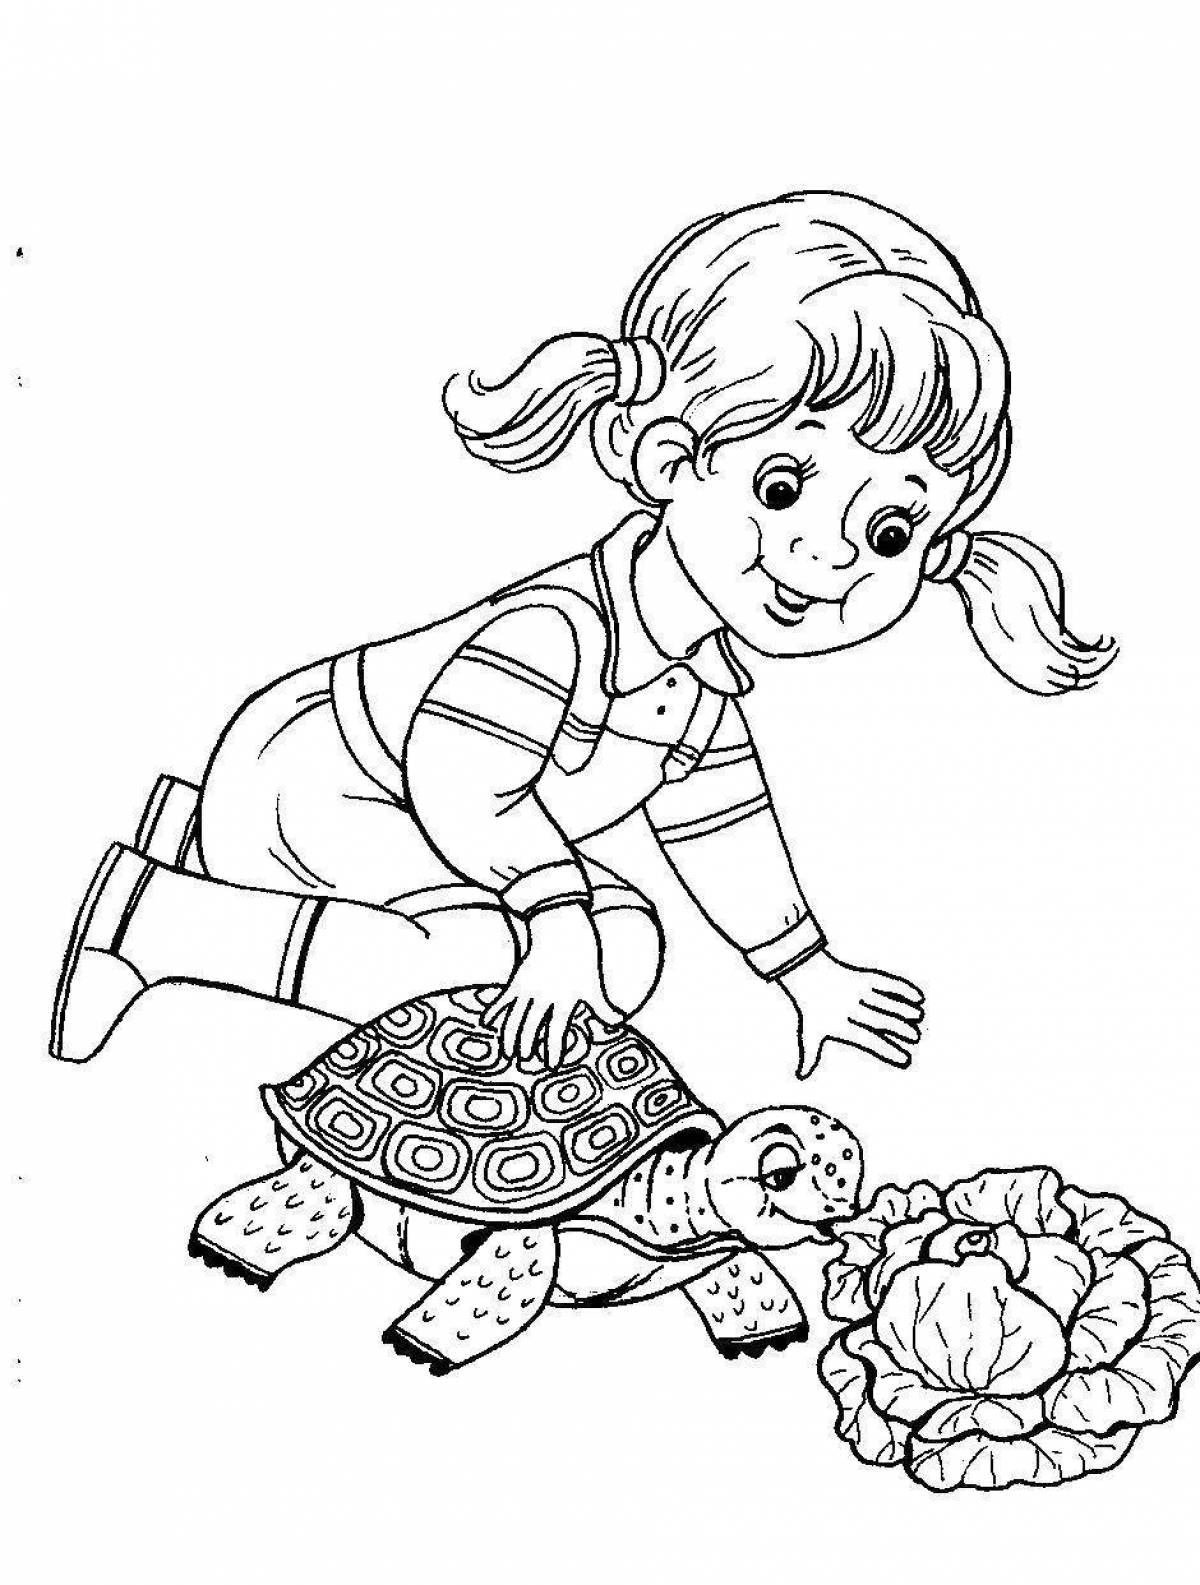 Playful kindness coloring page